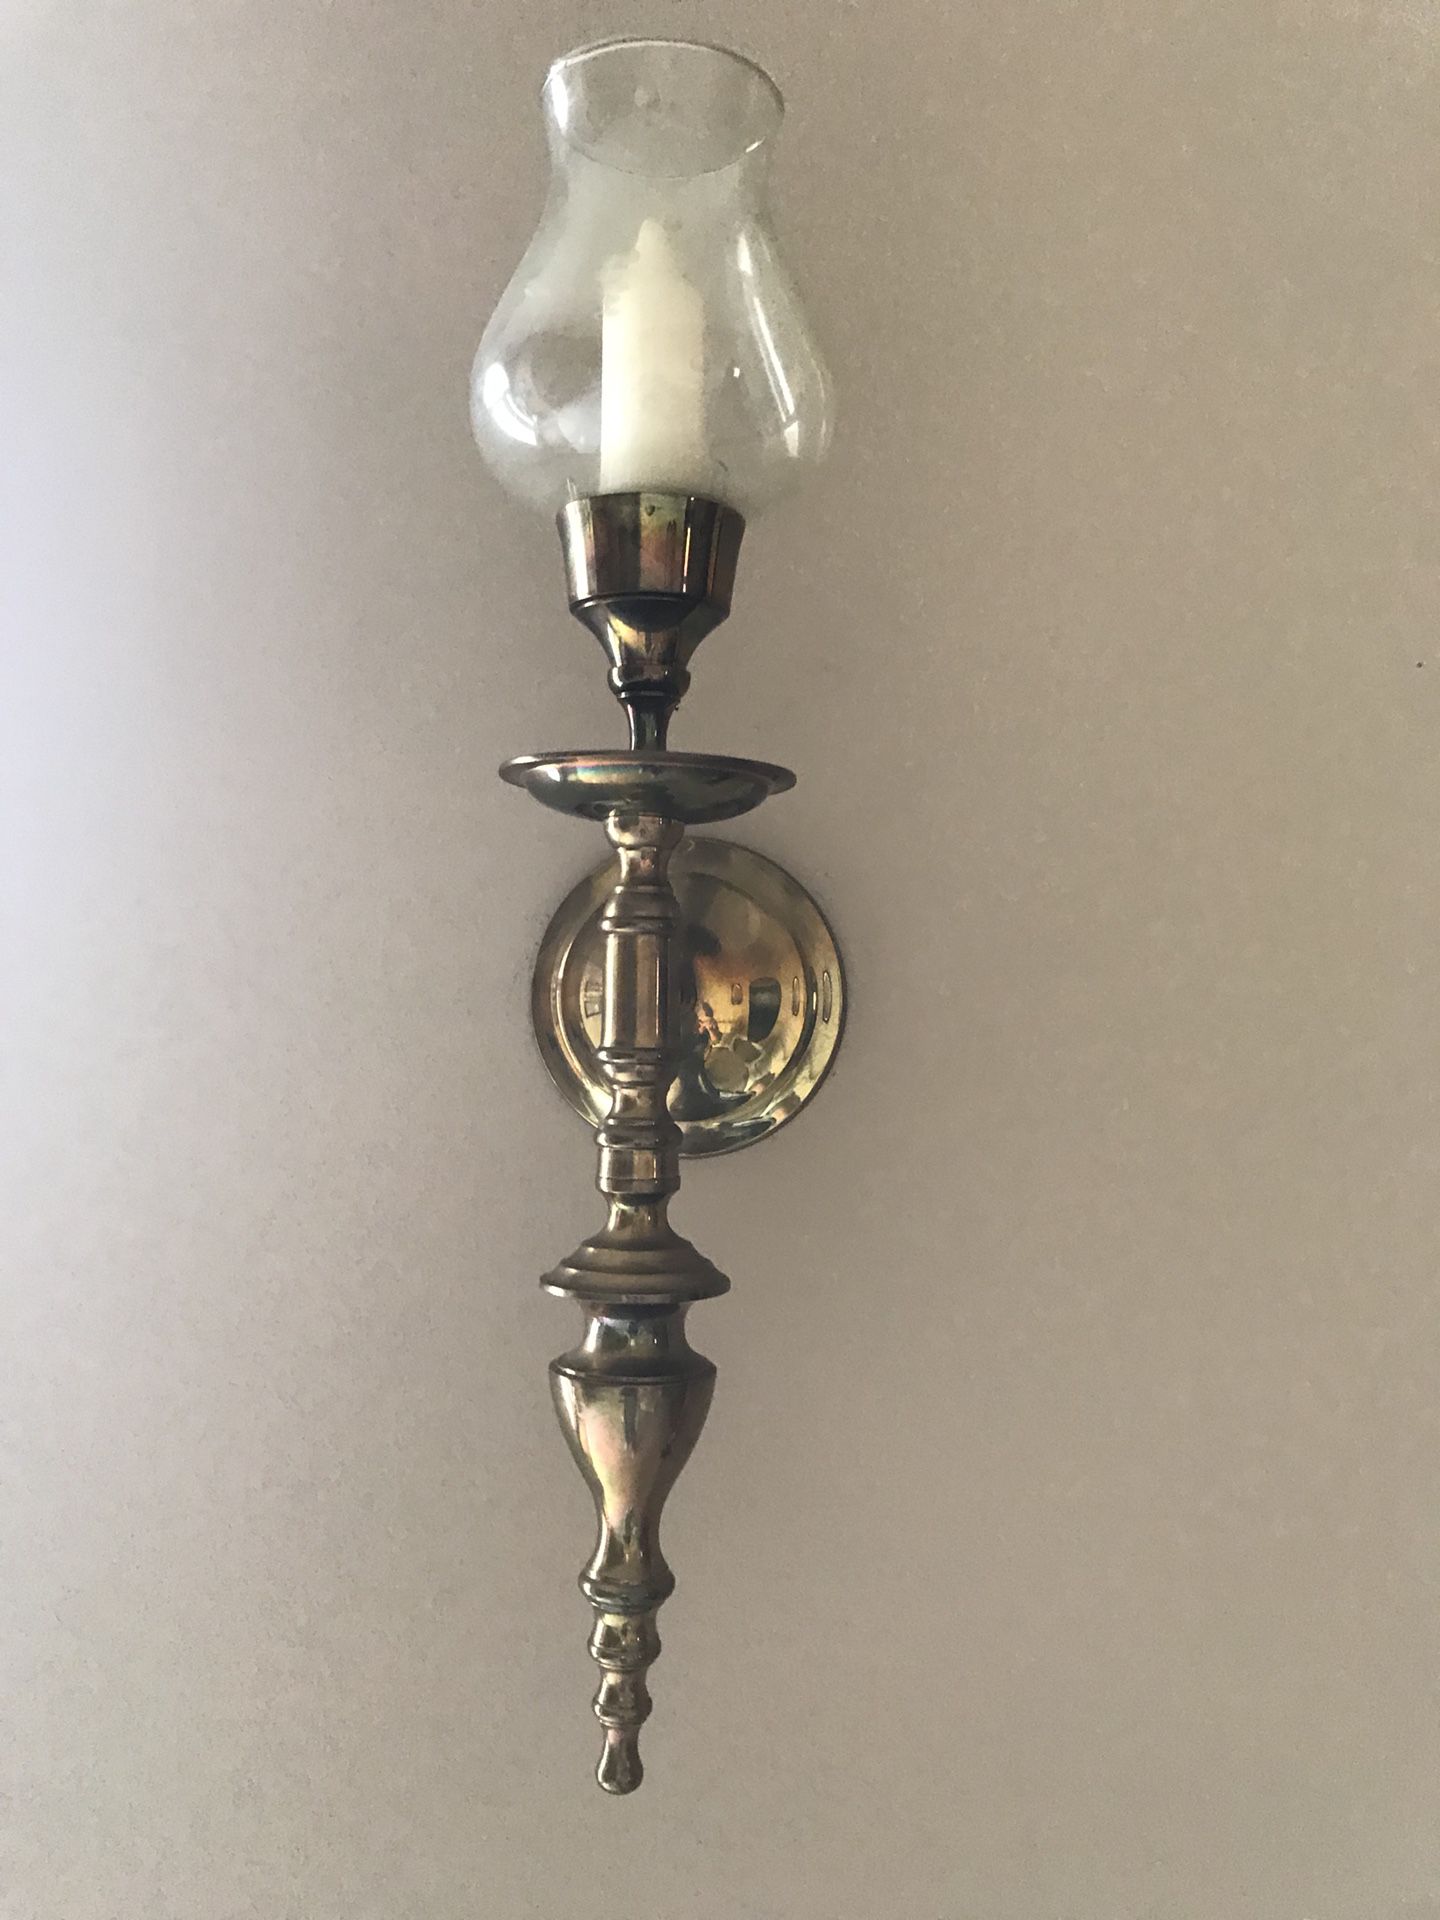 Brass and glass candle sconce